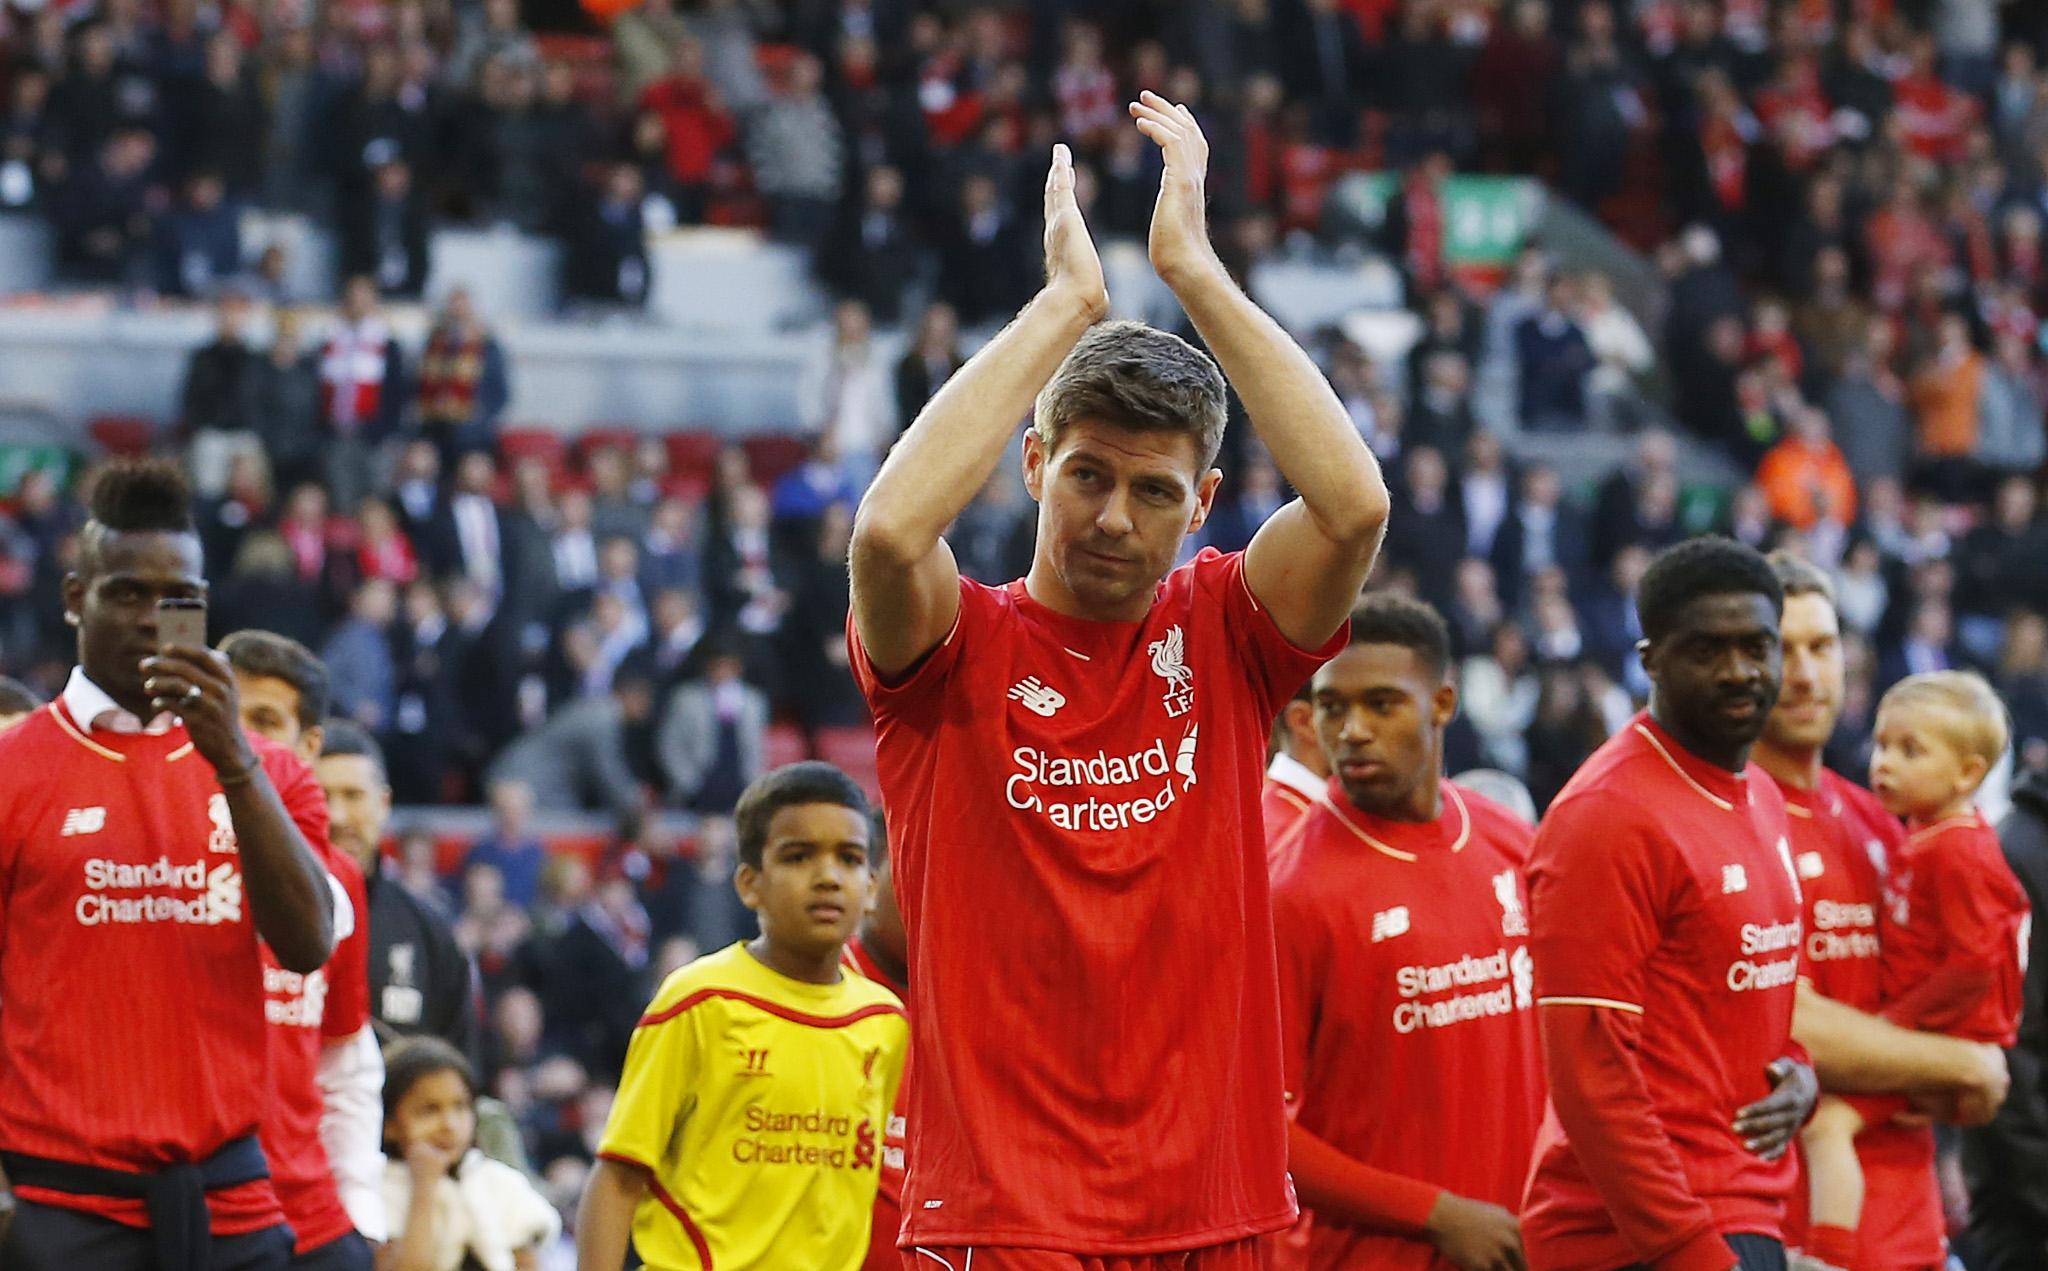 Happy 35th birthday to Steven Gerrard! Had Liverpool defeated Aston Villa, he\d be playing in this match. 